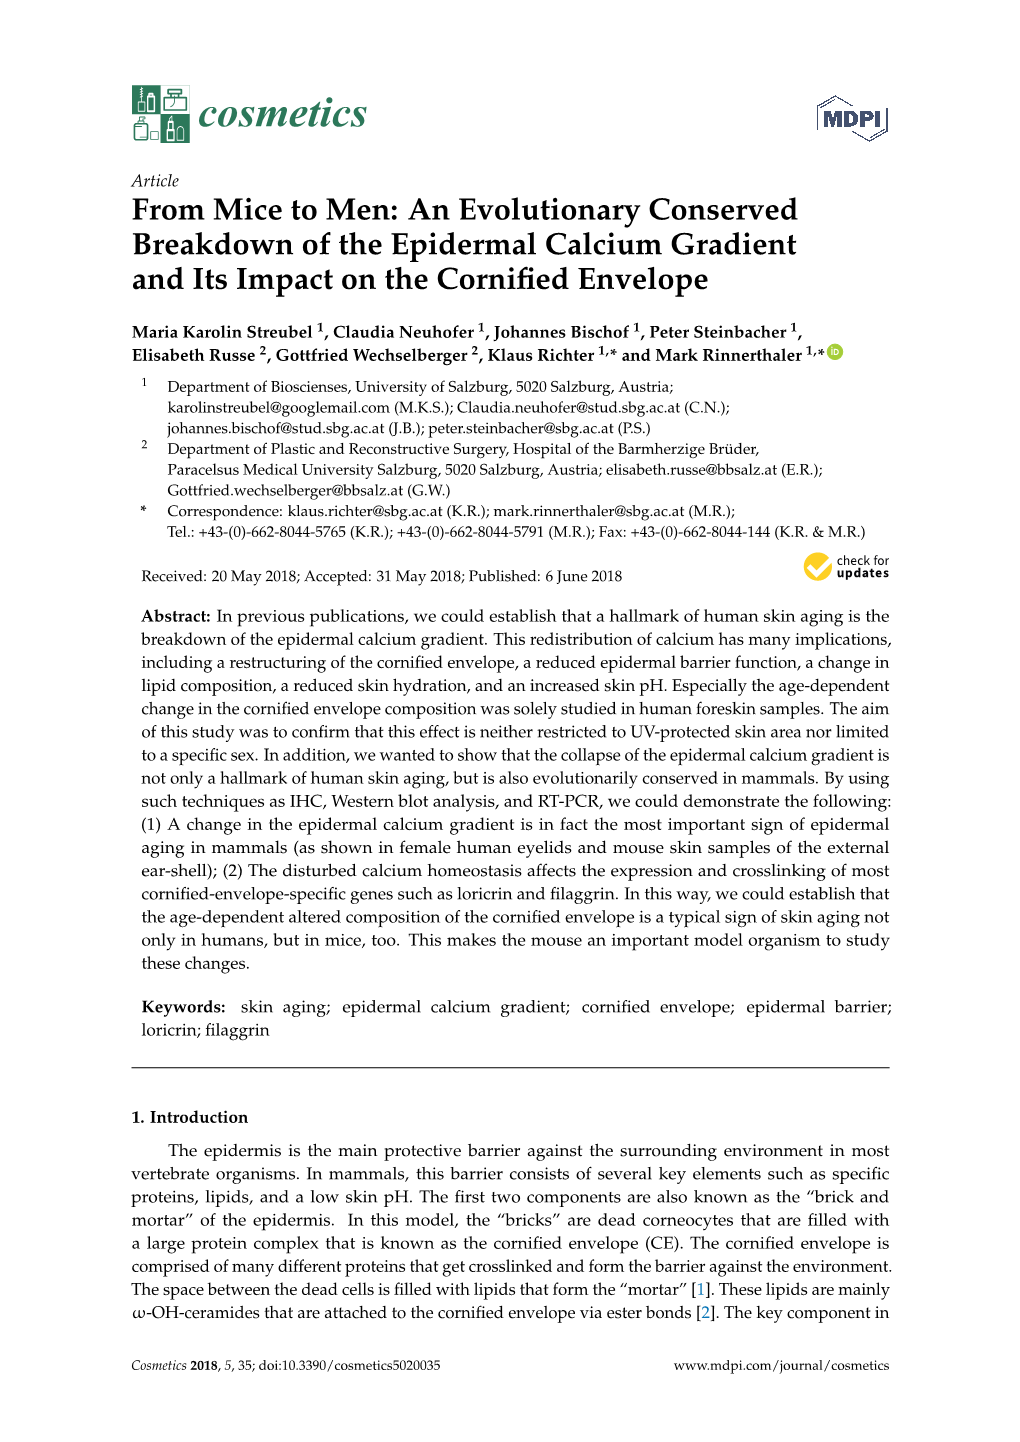 From Mice to Men: an Evolutionary Conserved Breakdown of the Epidermal Calcium Gradient and Its Impact on the Corniﬁed Envelope